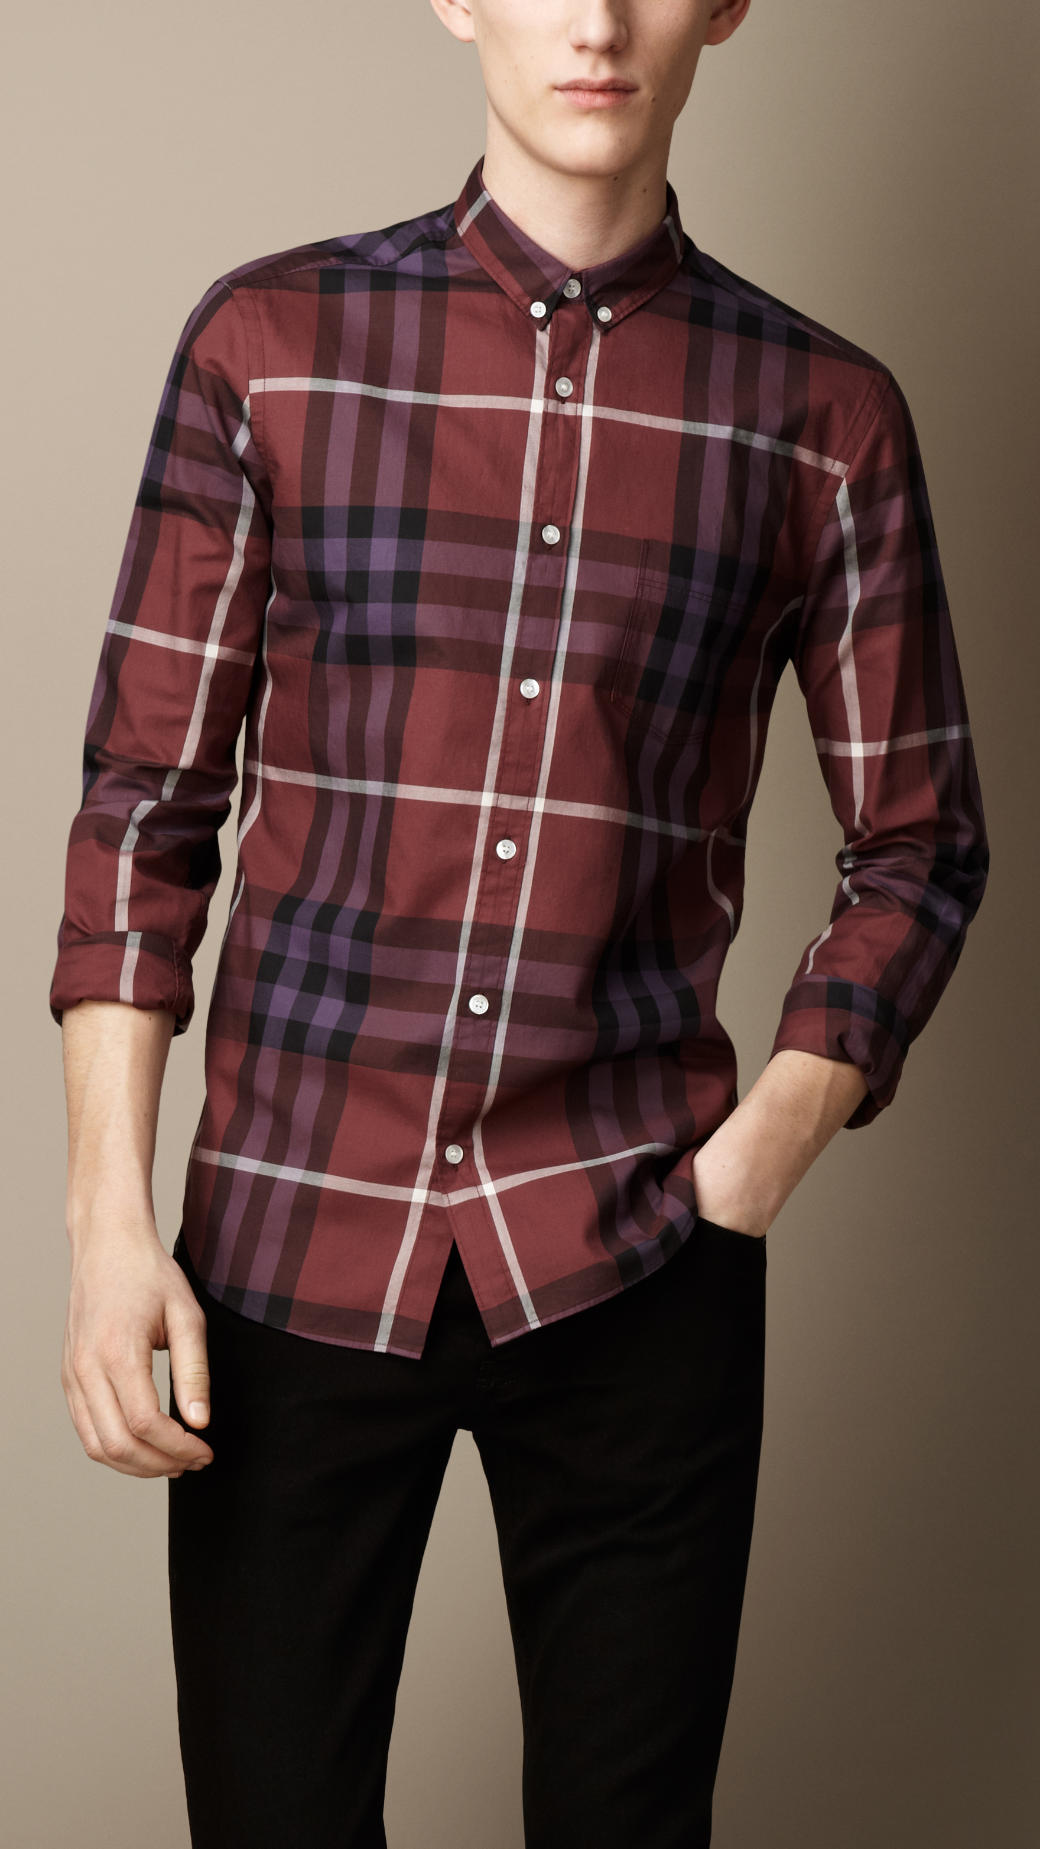 Burberry Exploded Check Cotton Shirt for Men - Lyst